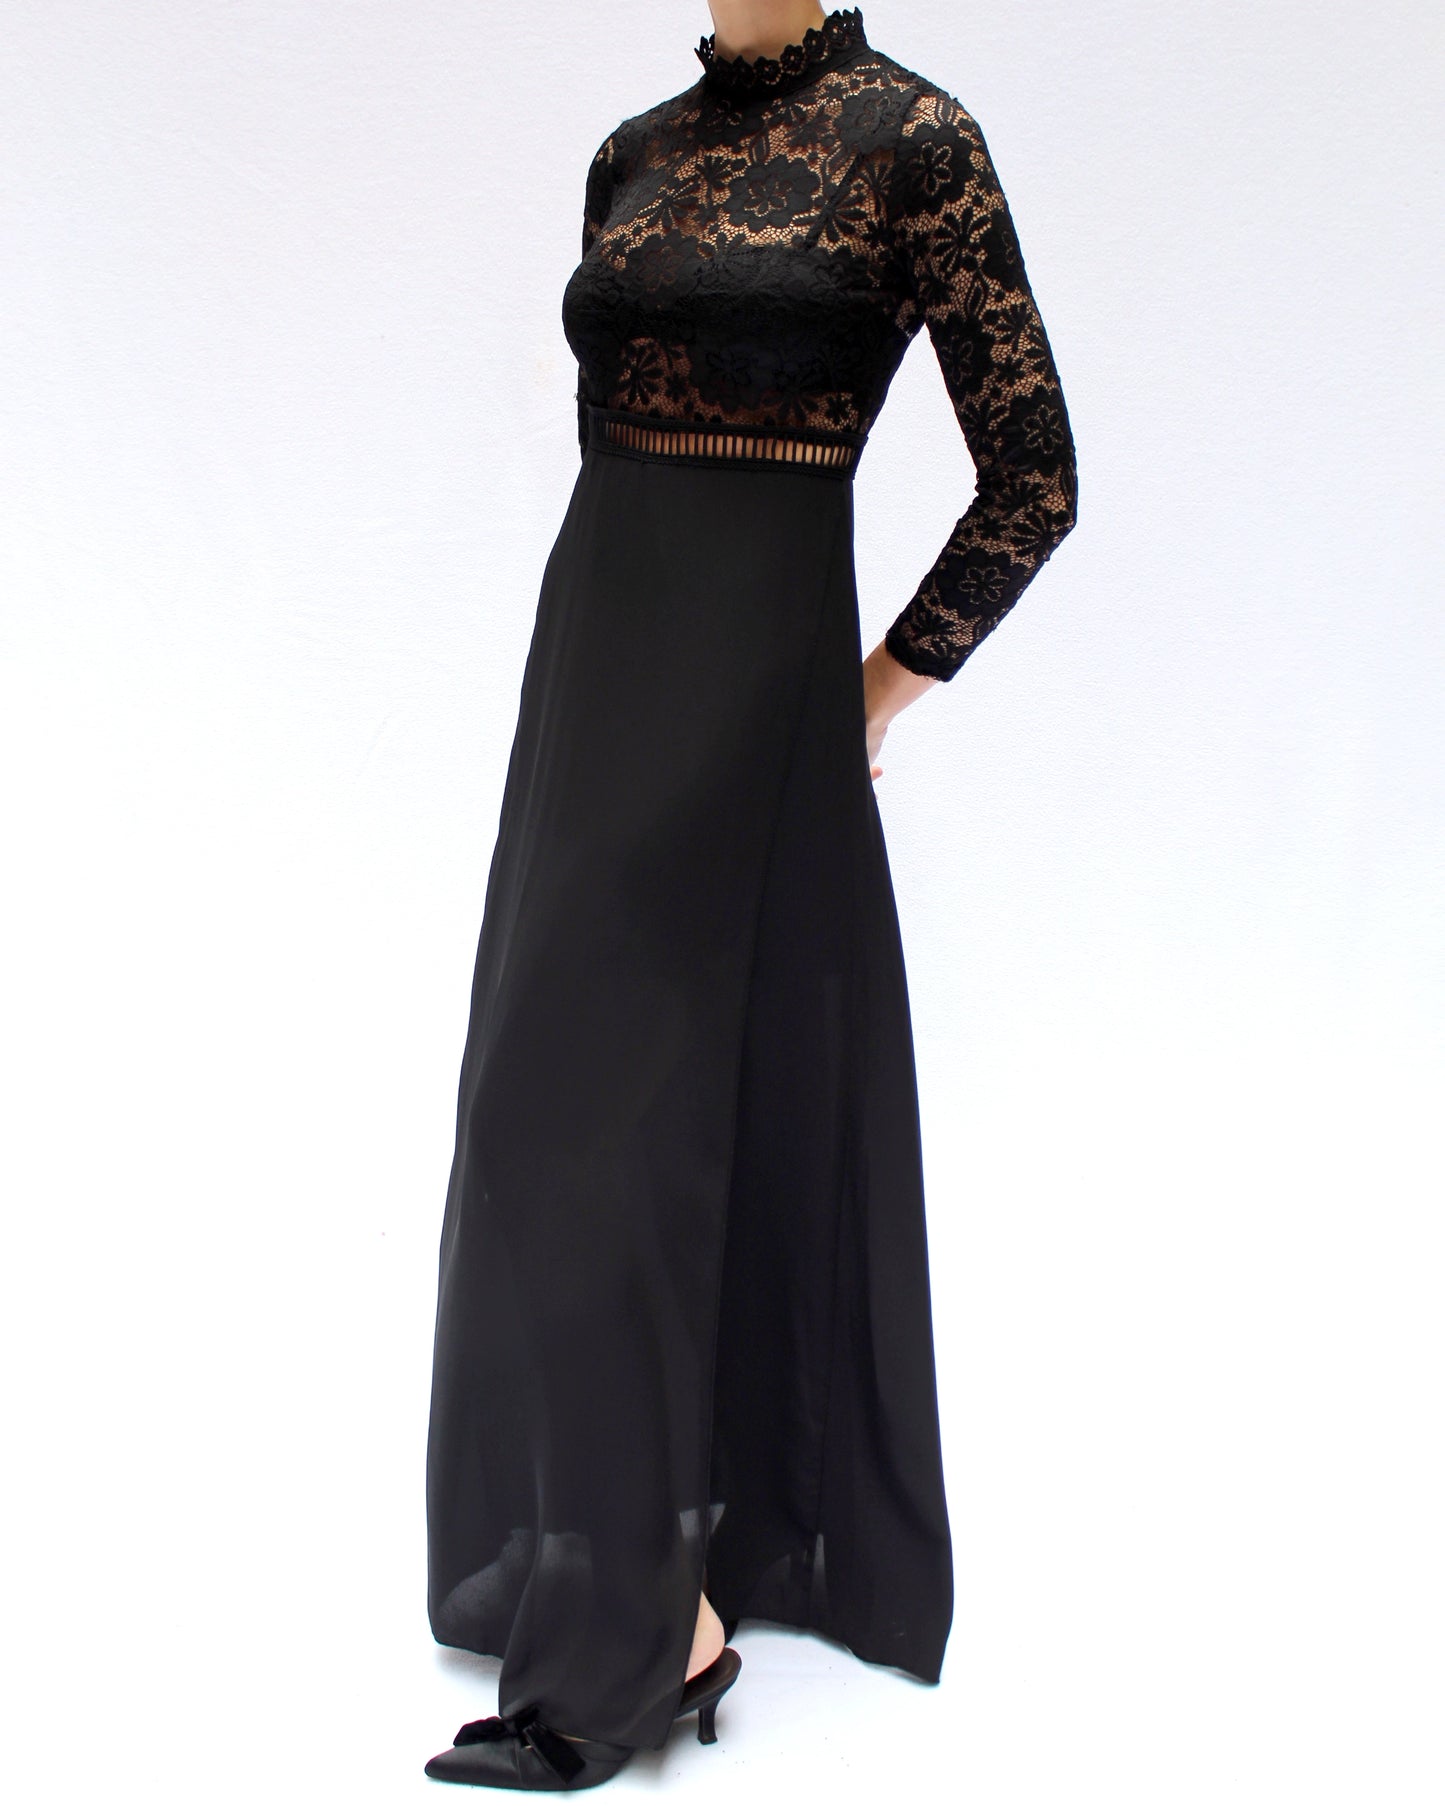 VINTAGE SHEER LACE BODICE LONG SLEEVE GOWN